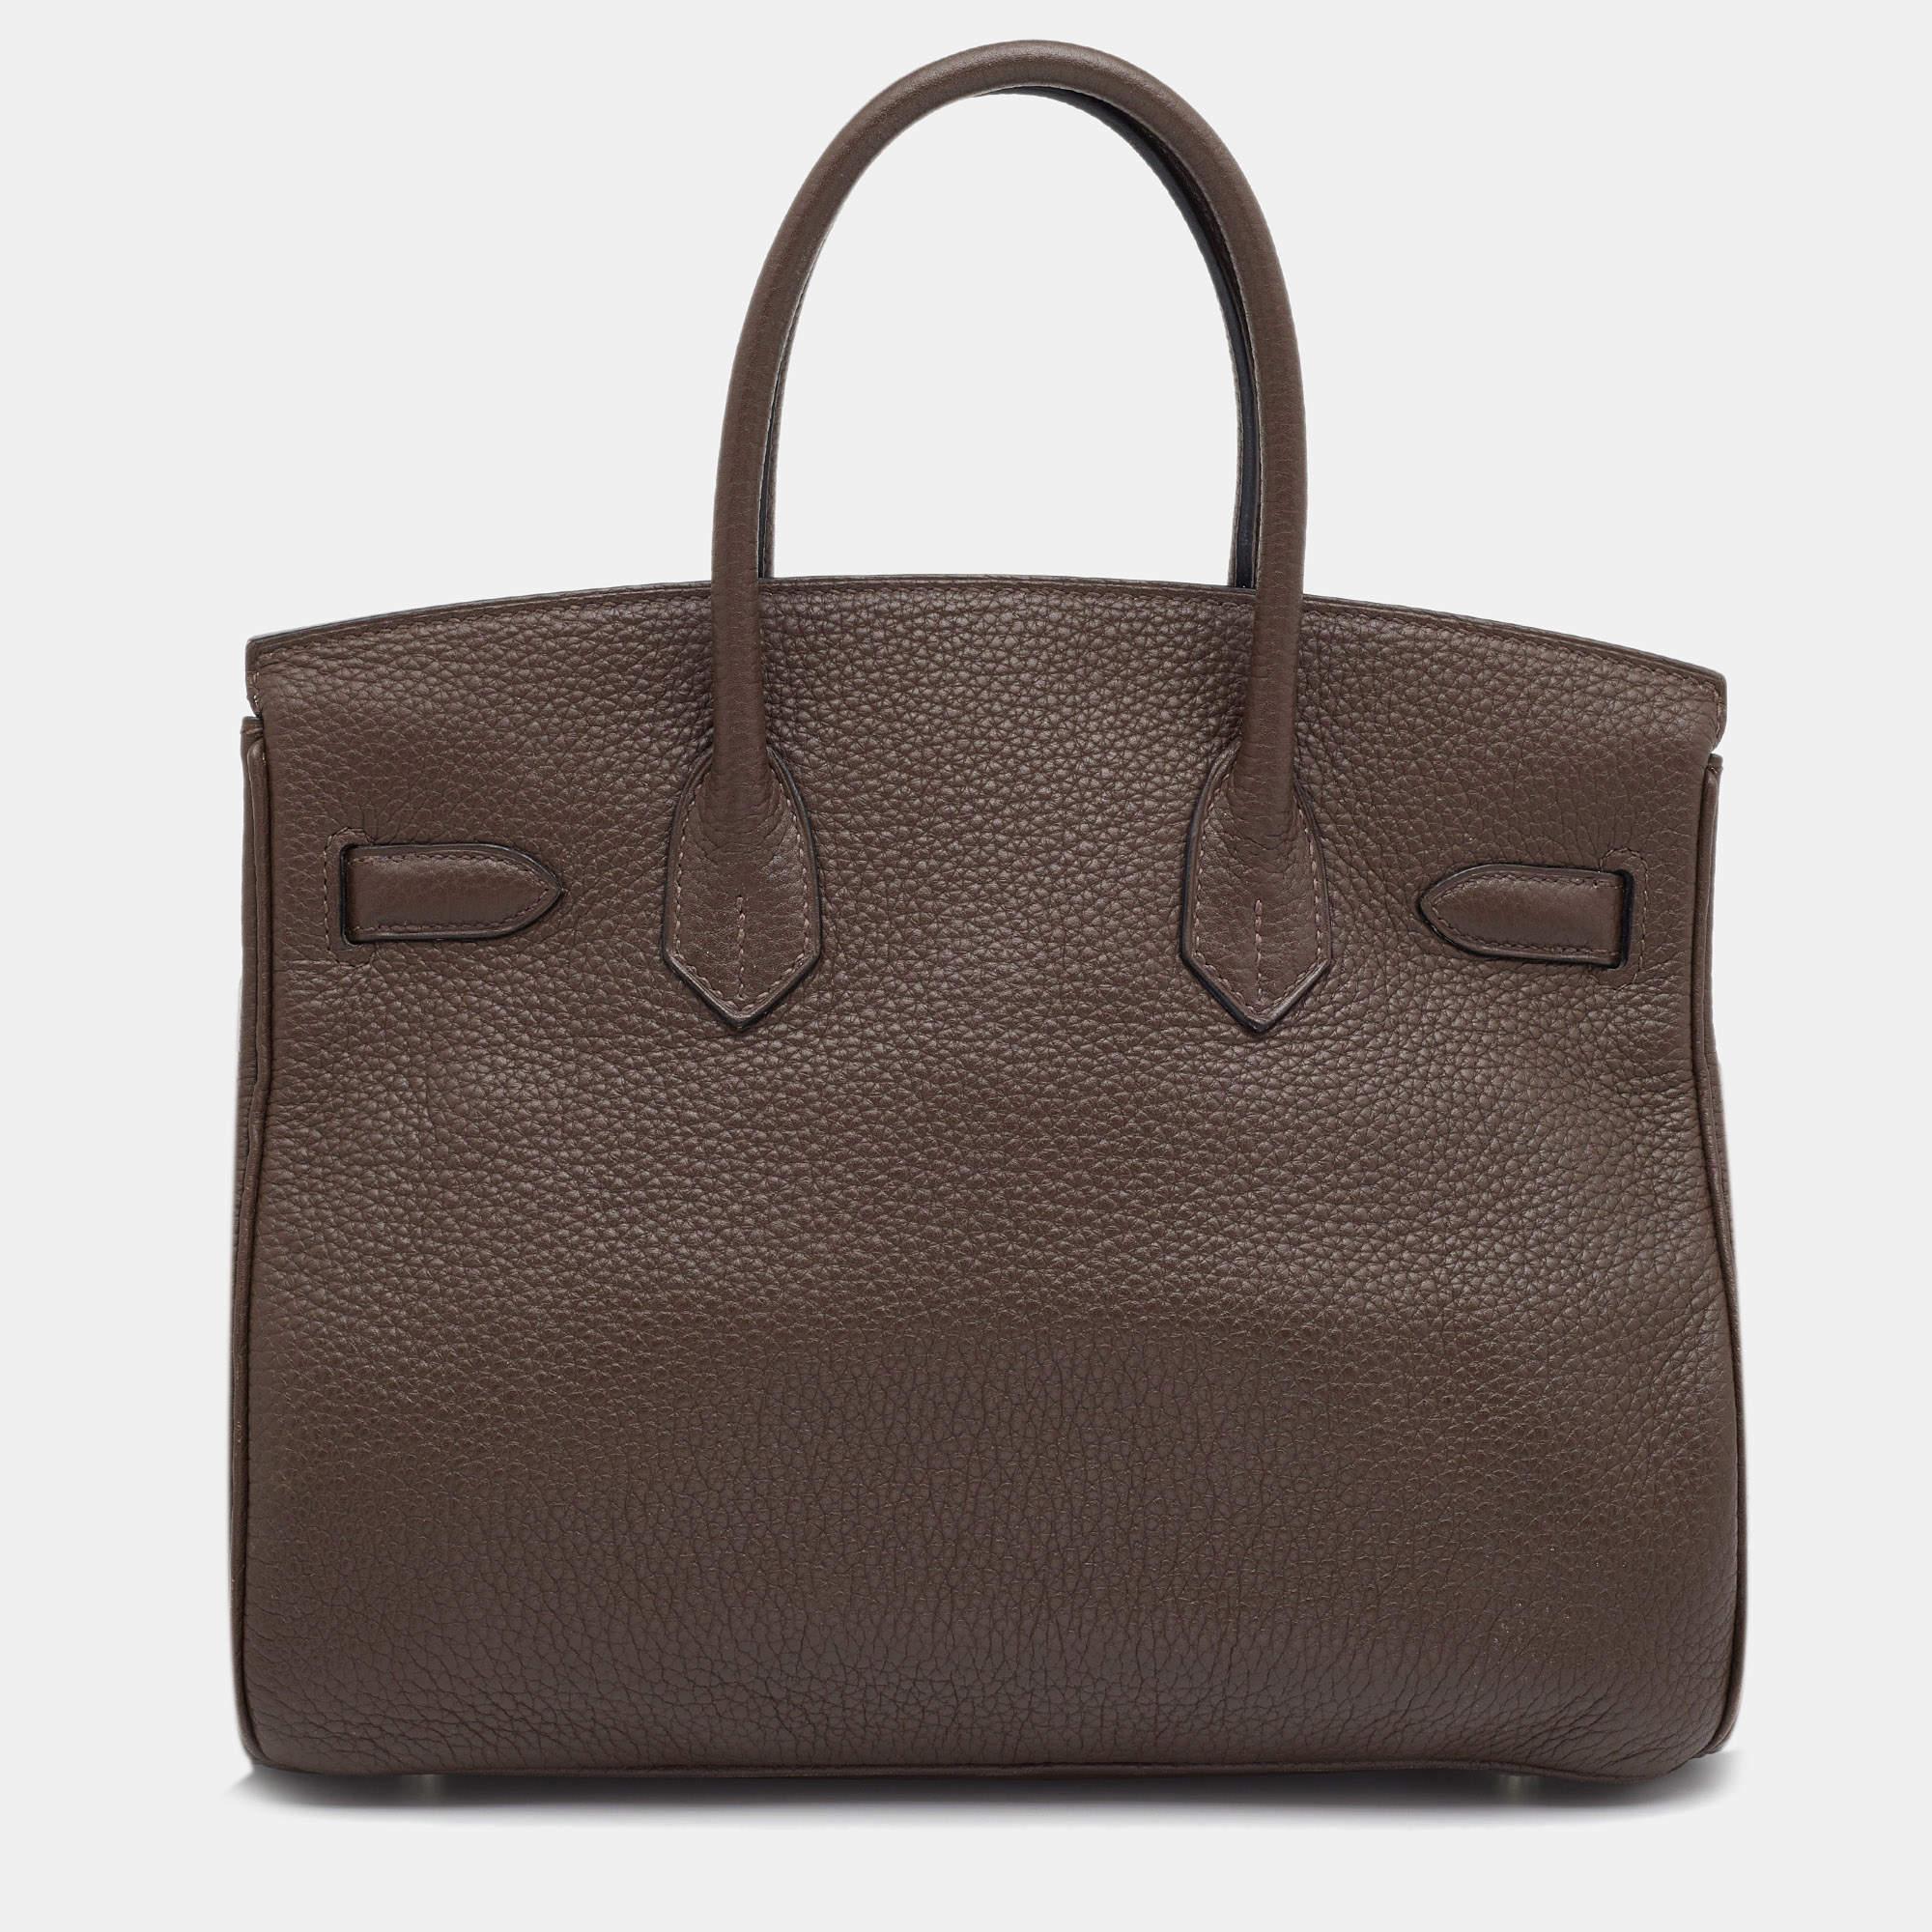 If you've wished to own an authentic Birkin, there is no better time to buy this coveted work of art than now. Here, we have this Chocolat Taurillon Clemence Birkin 30 just for you. Crafted in France from leather, the bag features dual top handles.